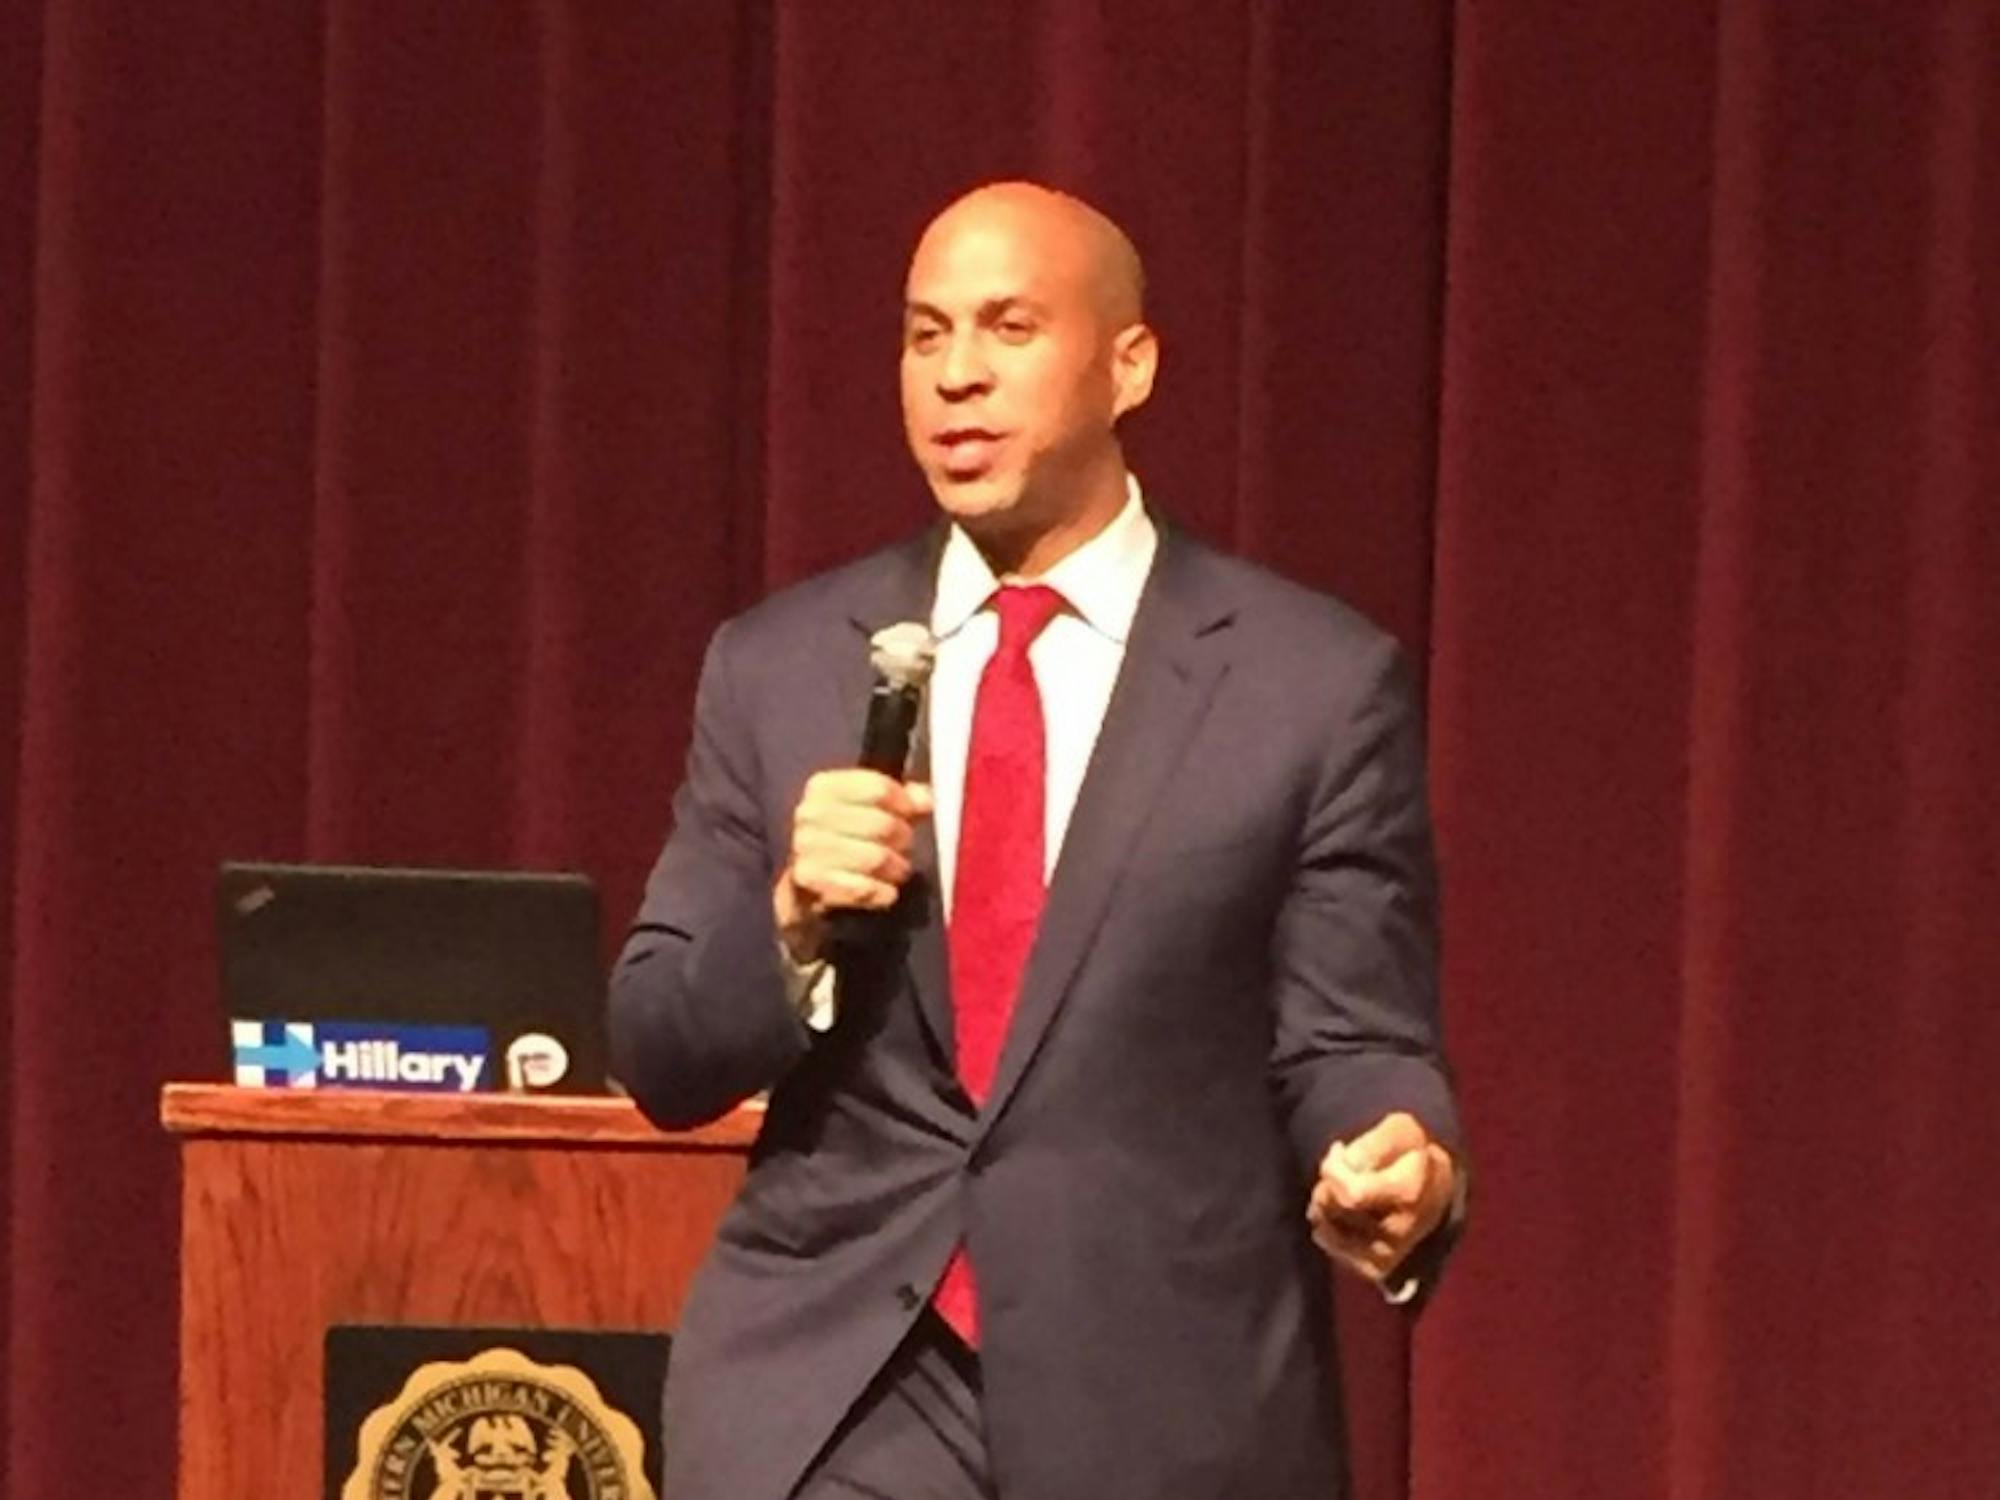 Sen. Cory Booker addressing the crowd during the Hillary Clinton&nbsp;campaign at EMU on Monday,&nbsp;Oct. 10